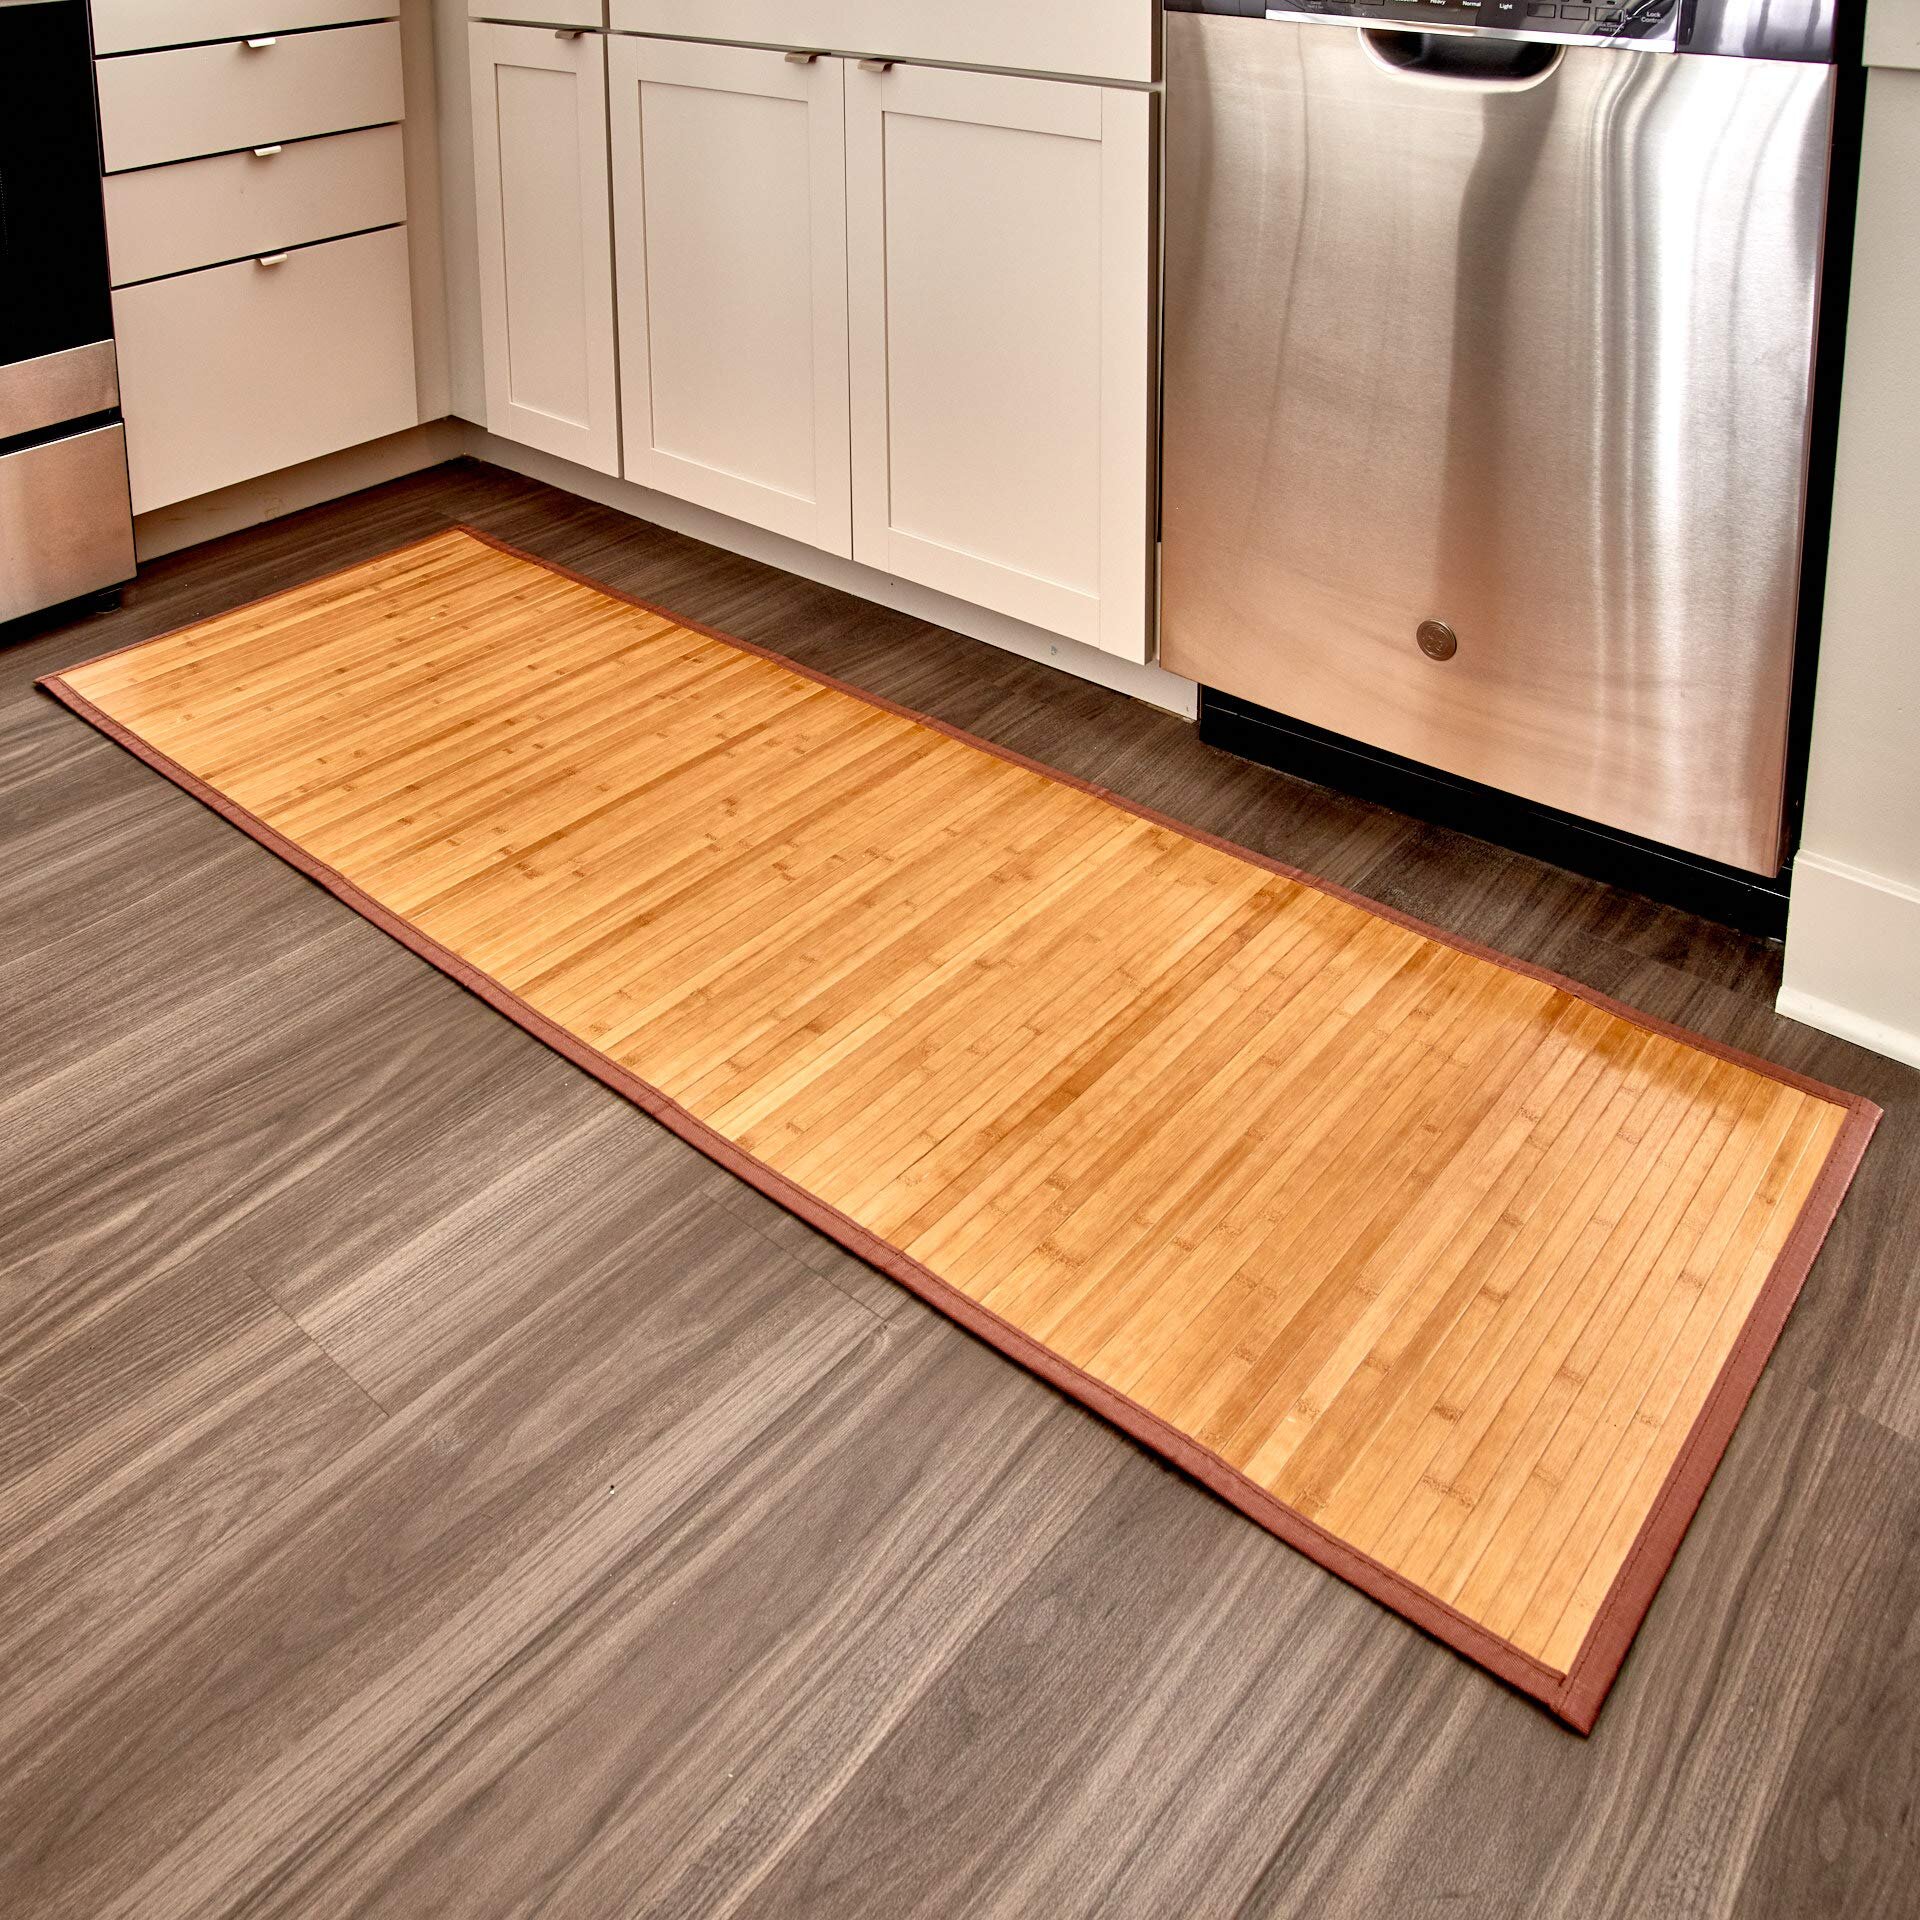 Stylish and Functional Kitchen Rugs - Non-slip and Durable